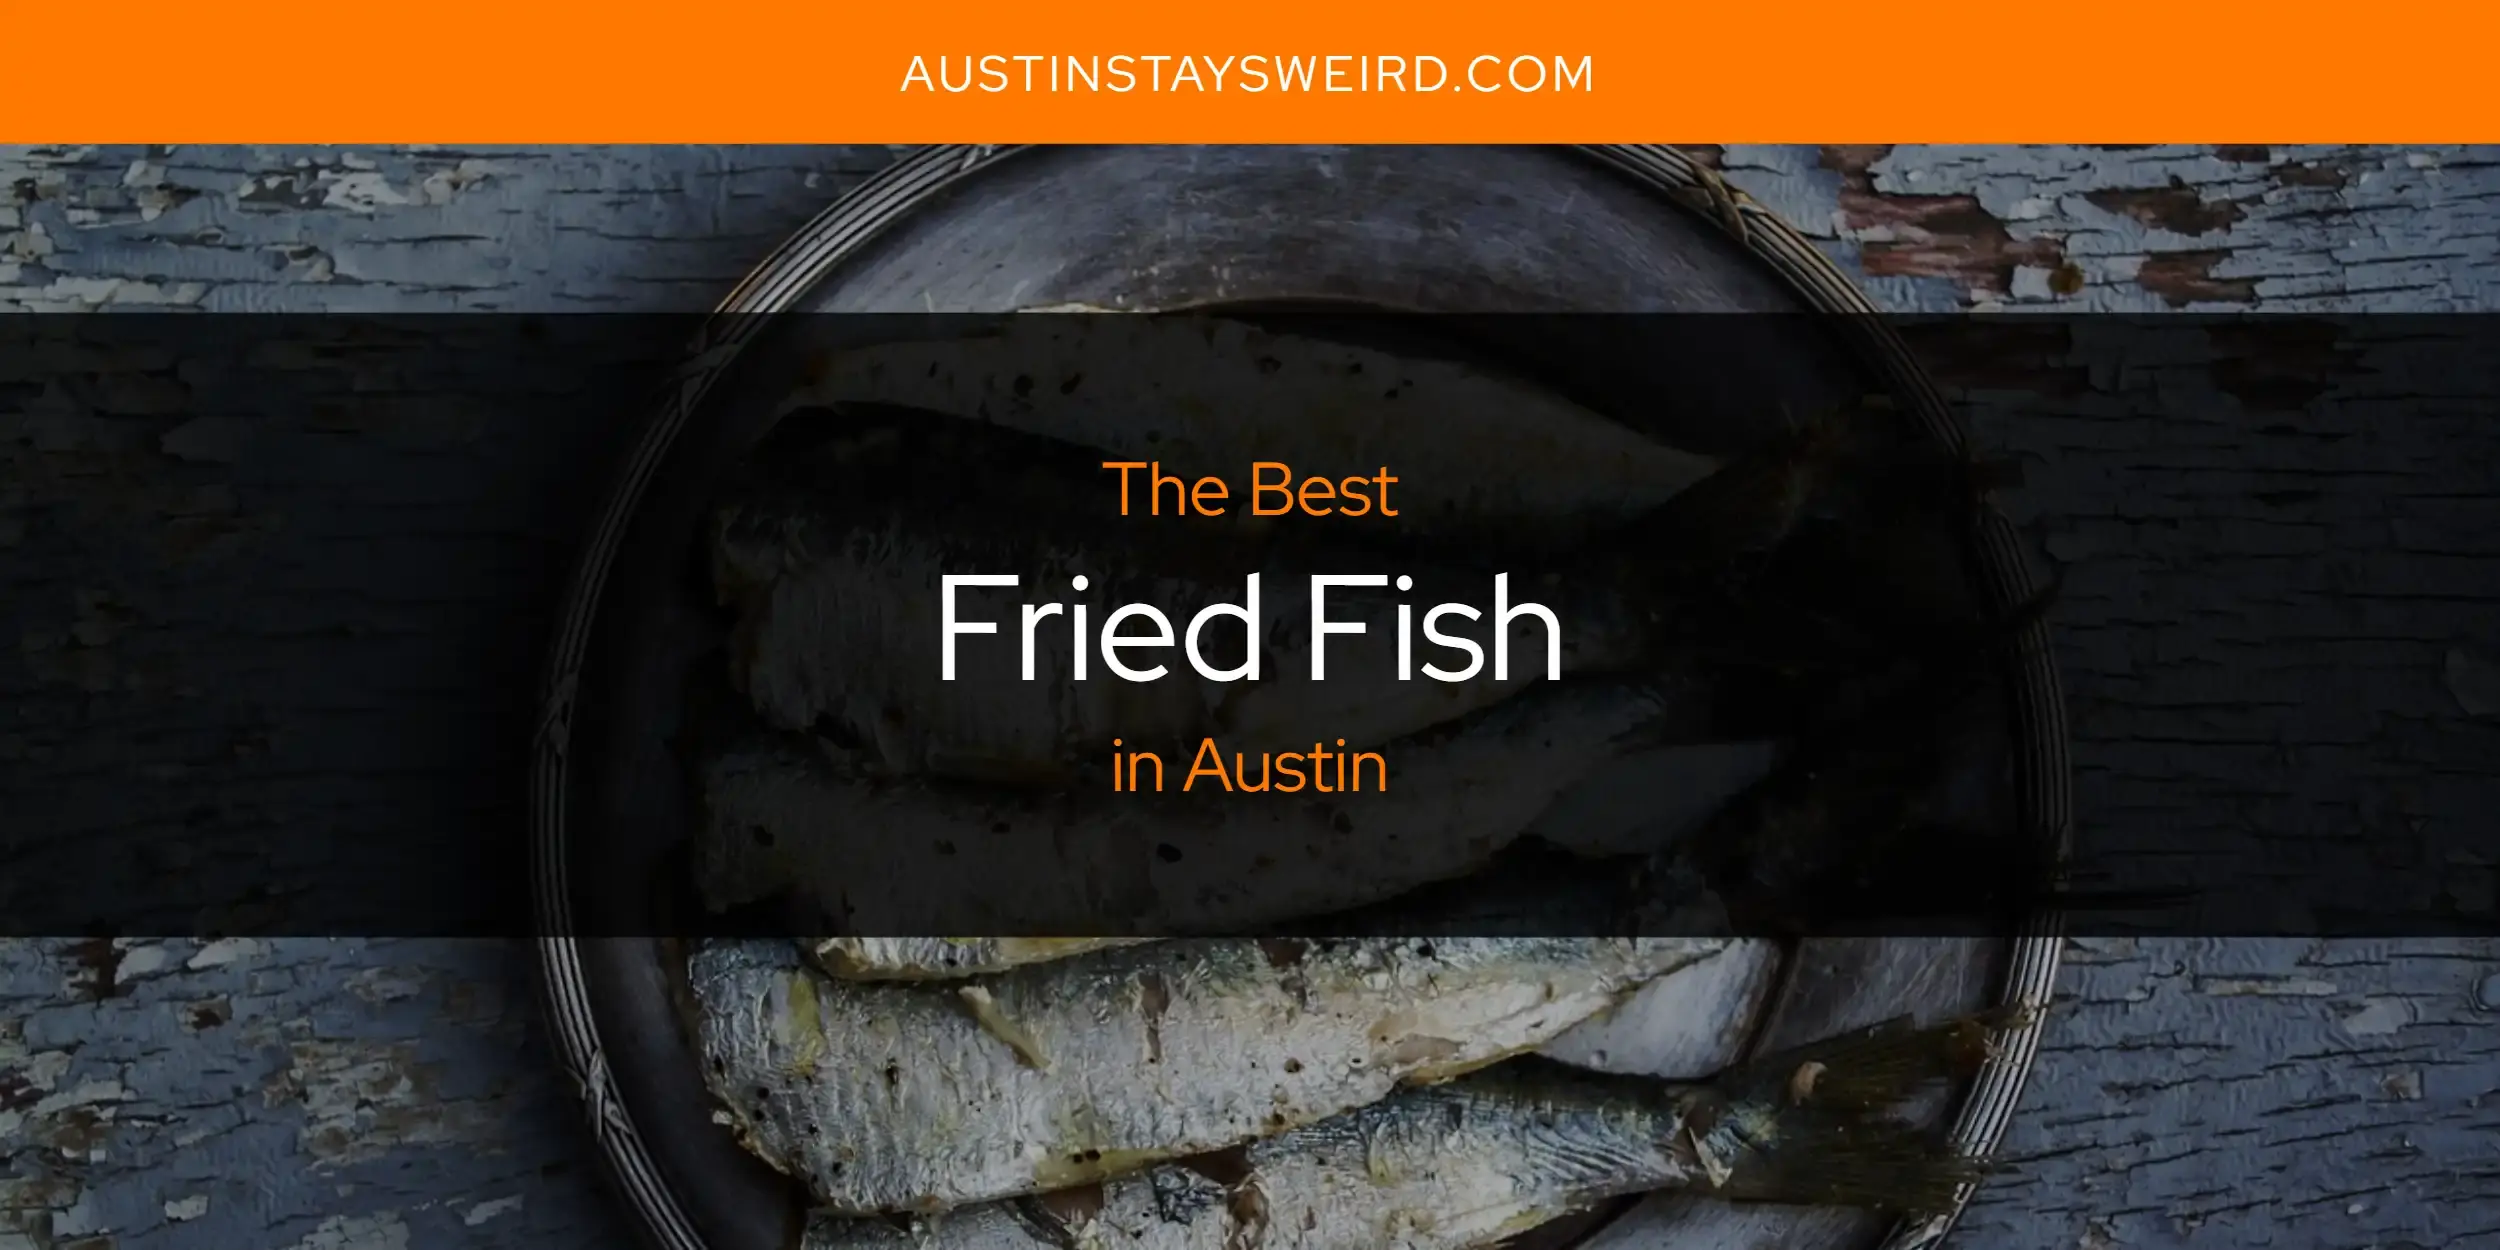 Best Fried Fish in Austin? Here's the Top 8